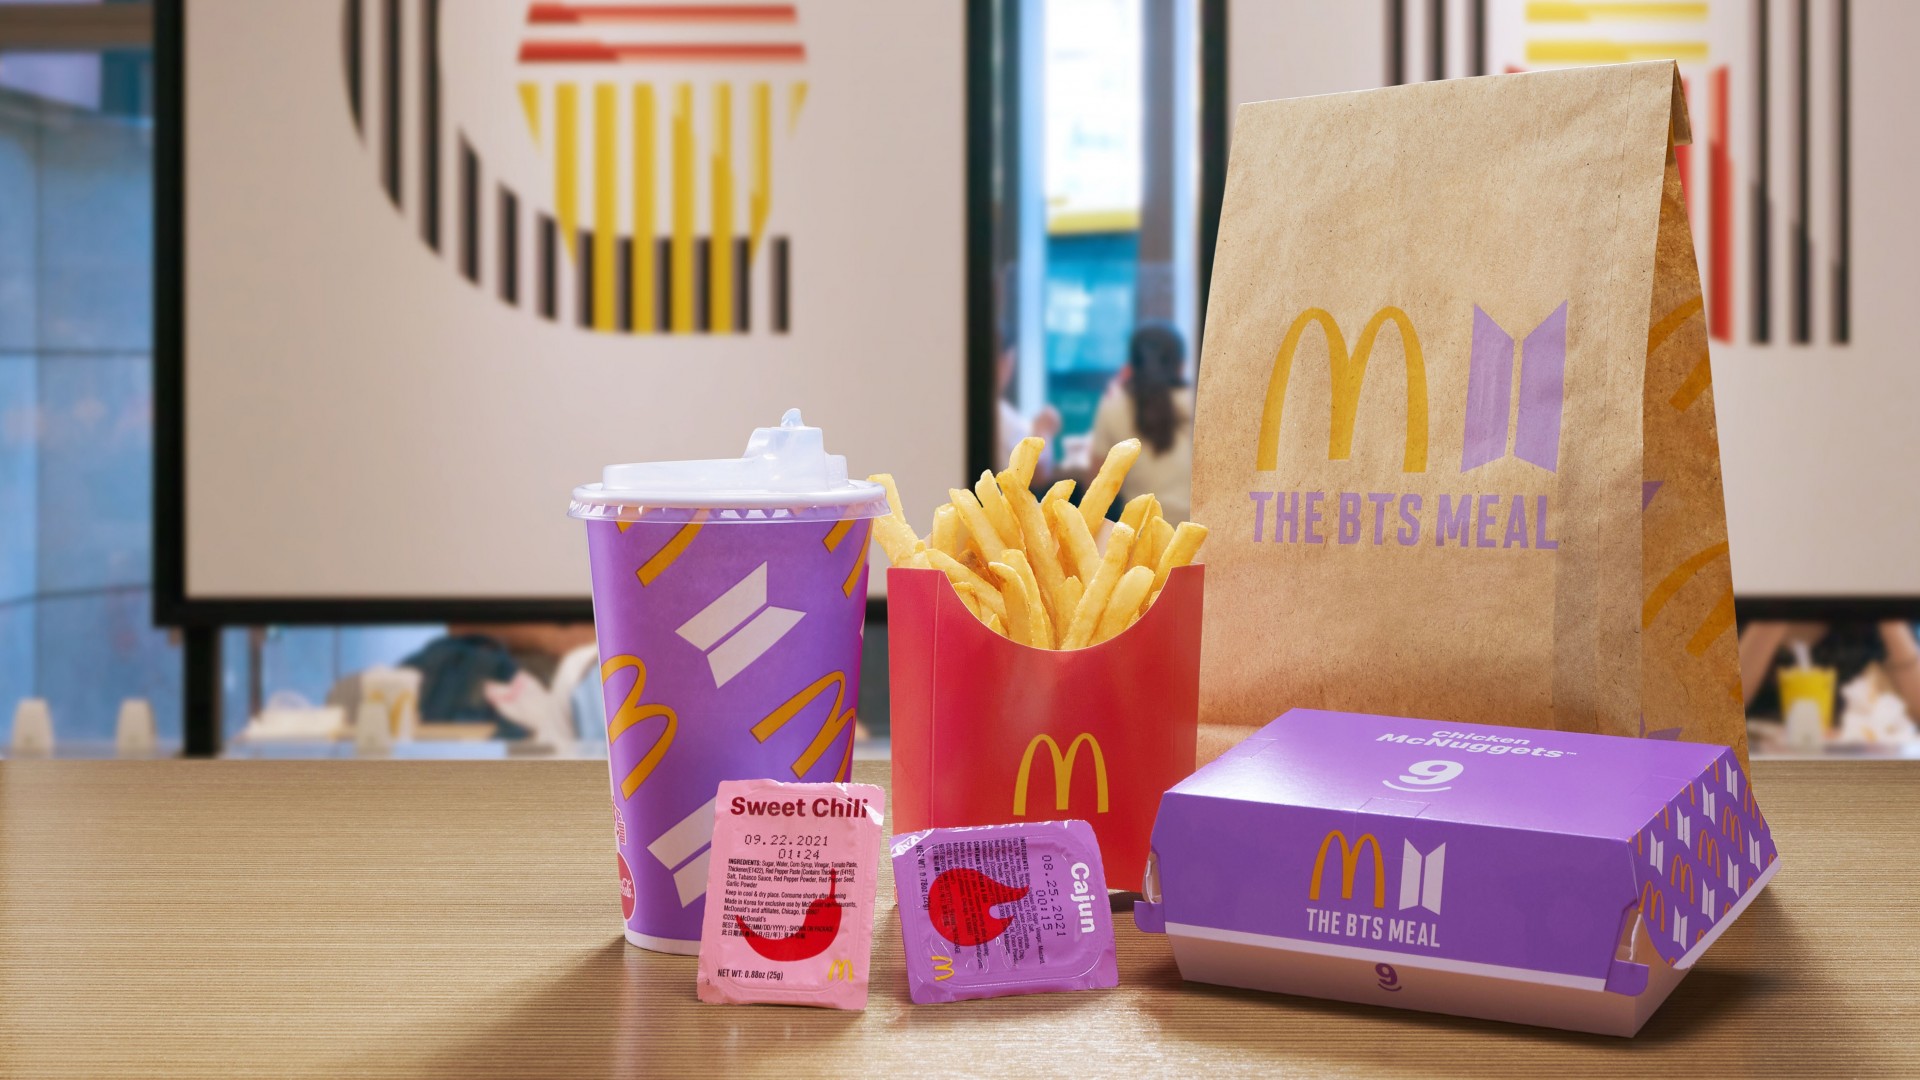 McDonald's BTS Meal With Special Sauces Delights Hong Kong Fans Of The K Pop Superstars, As It Has Those Around The World. South China Morning Post